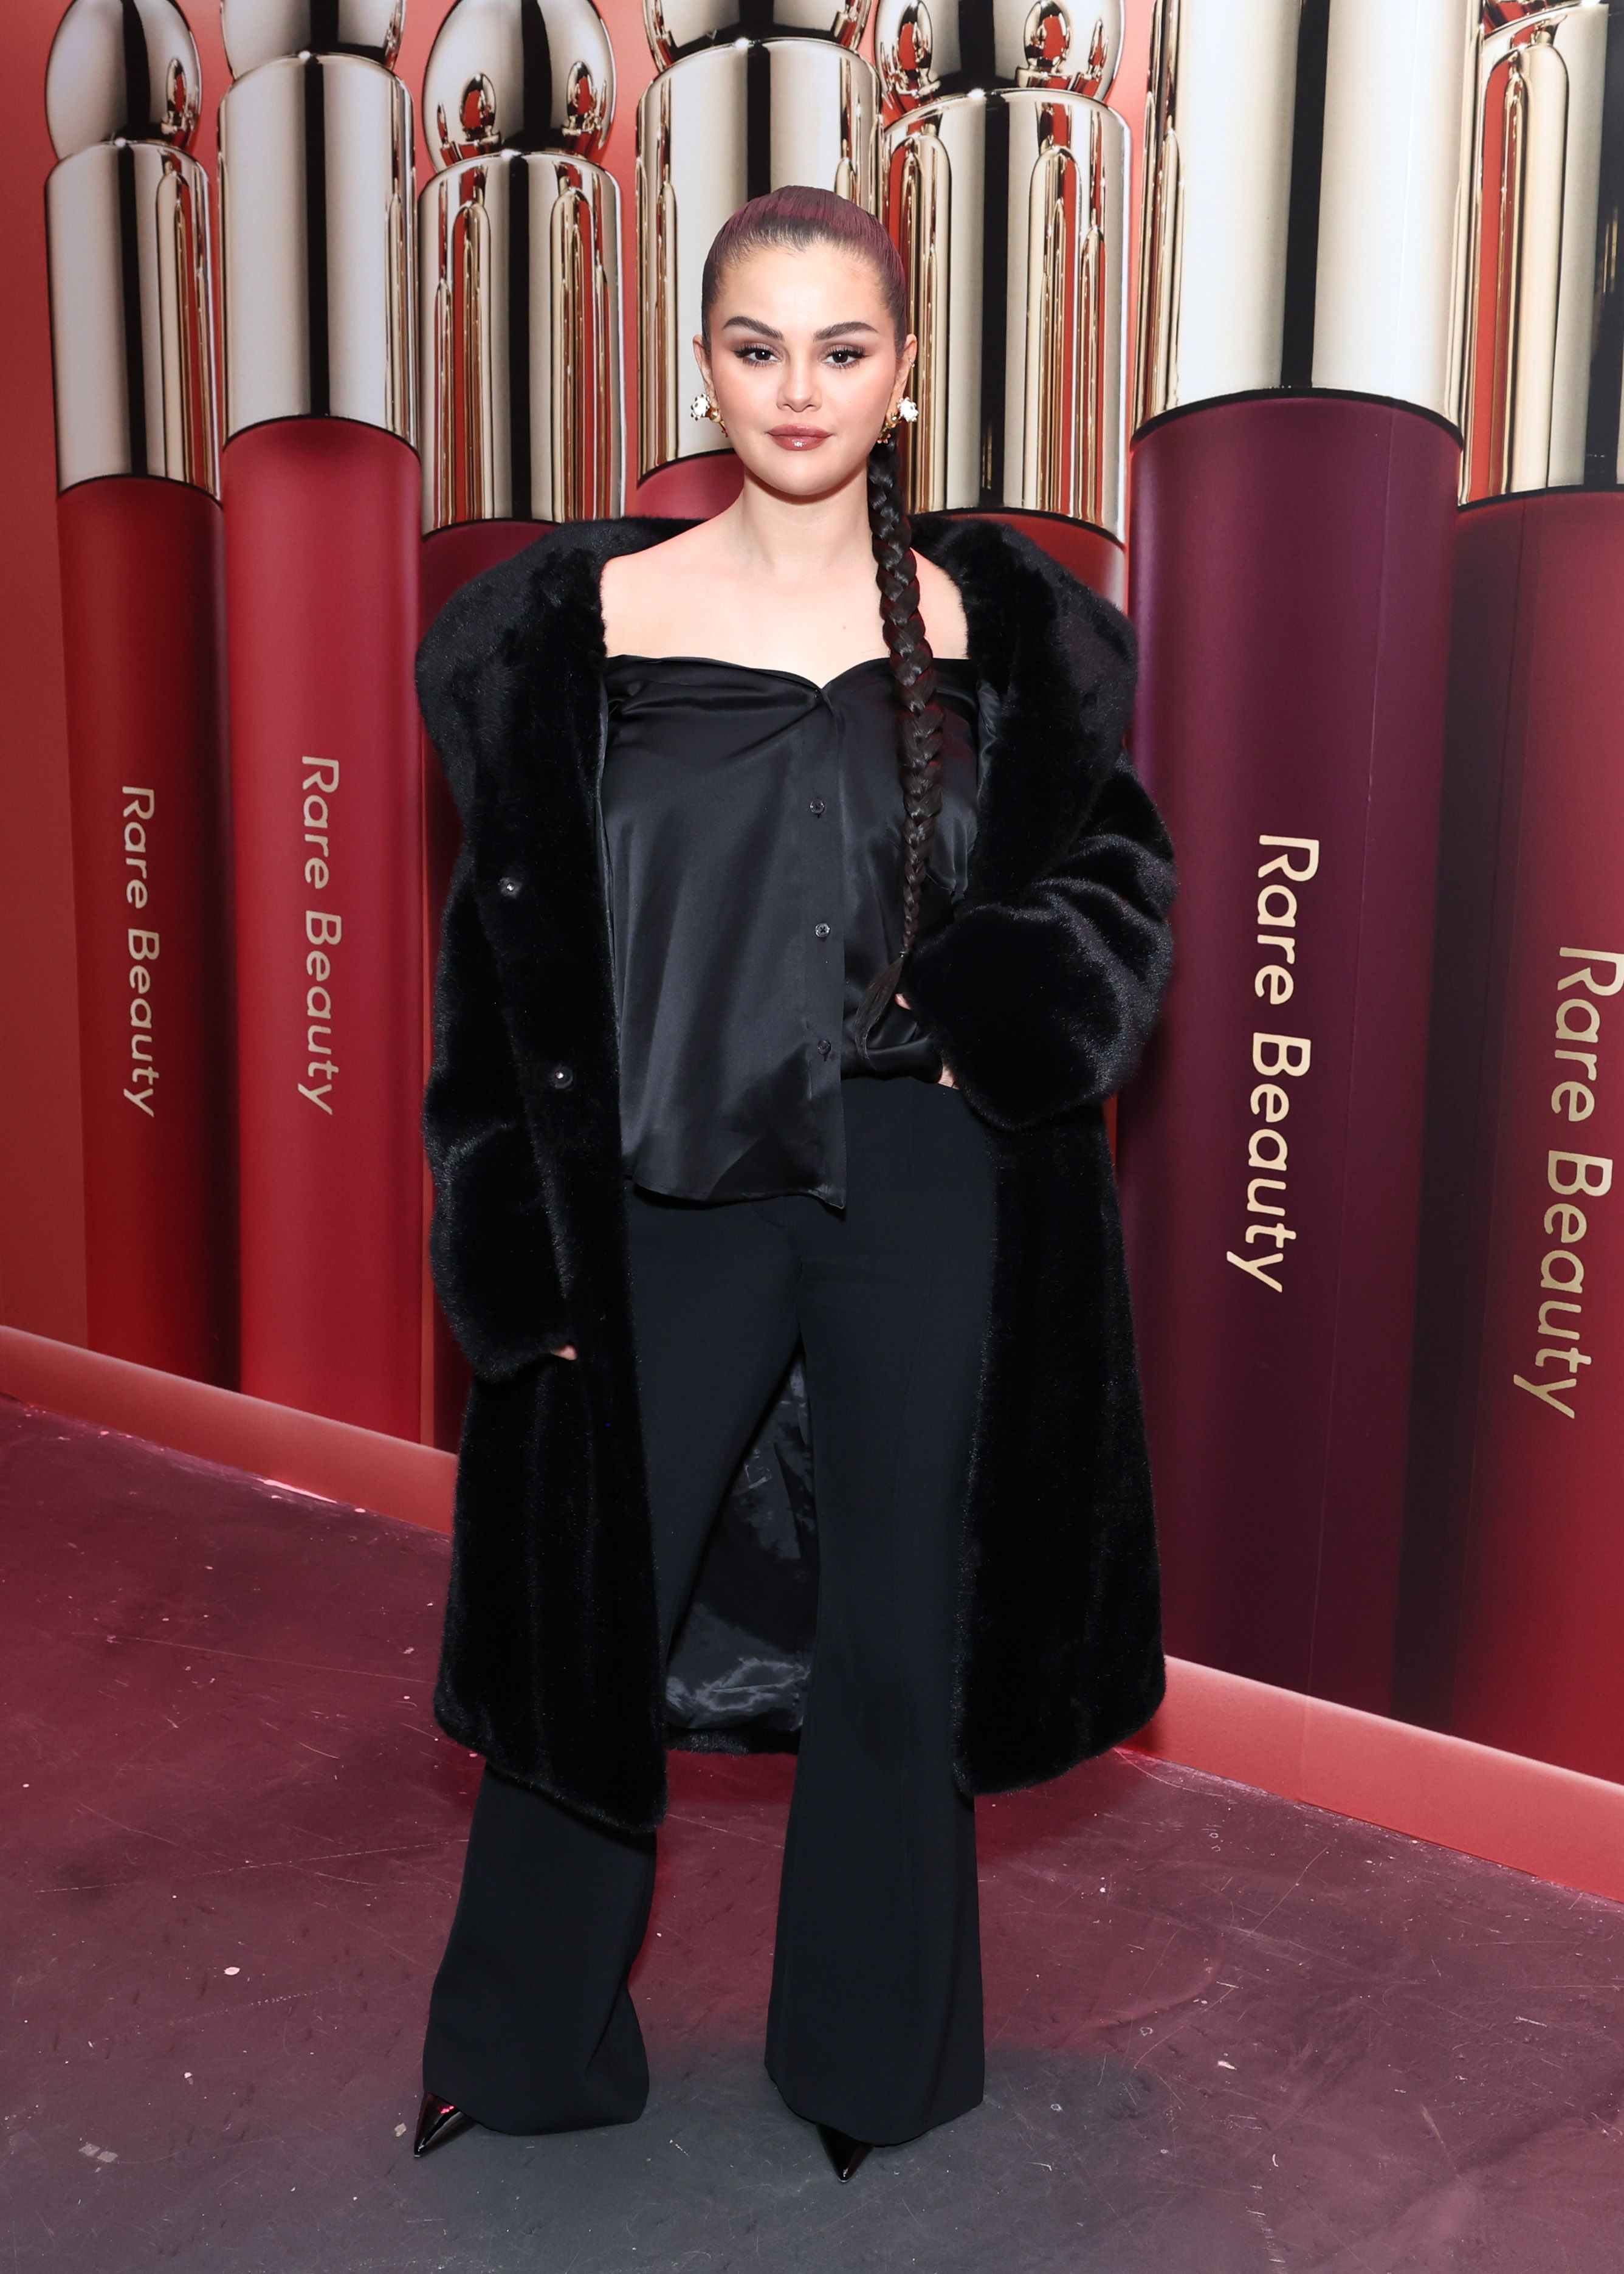 Selena Gomez wearing Delvaux at Rare Beauty Event in New York City